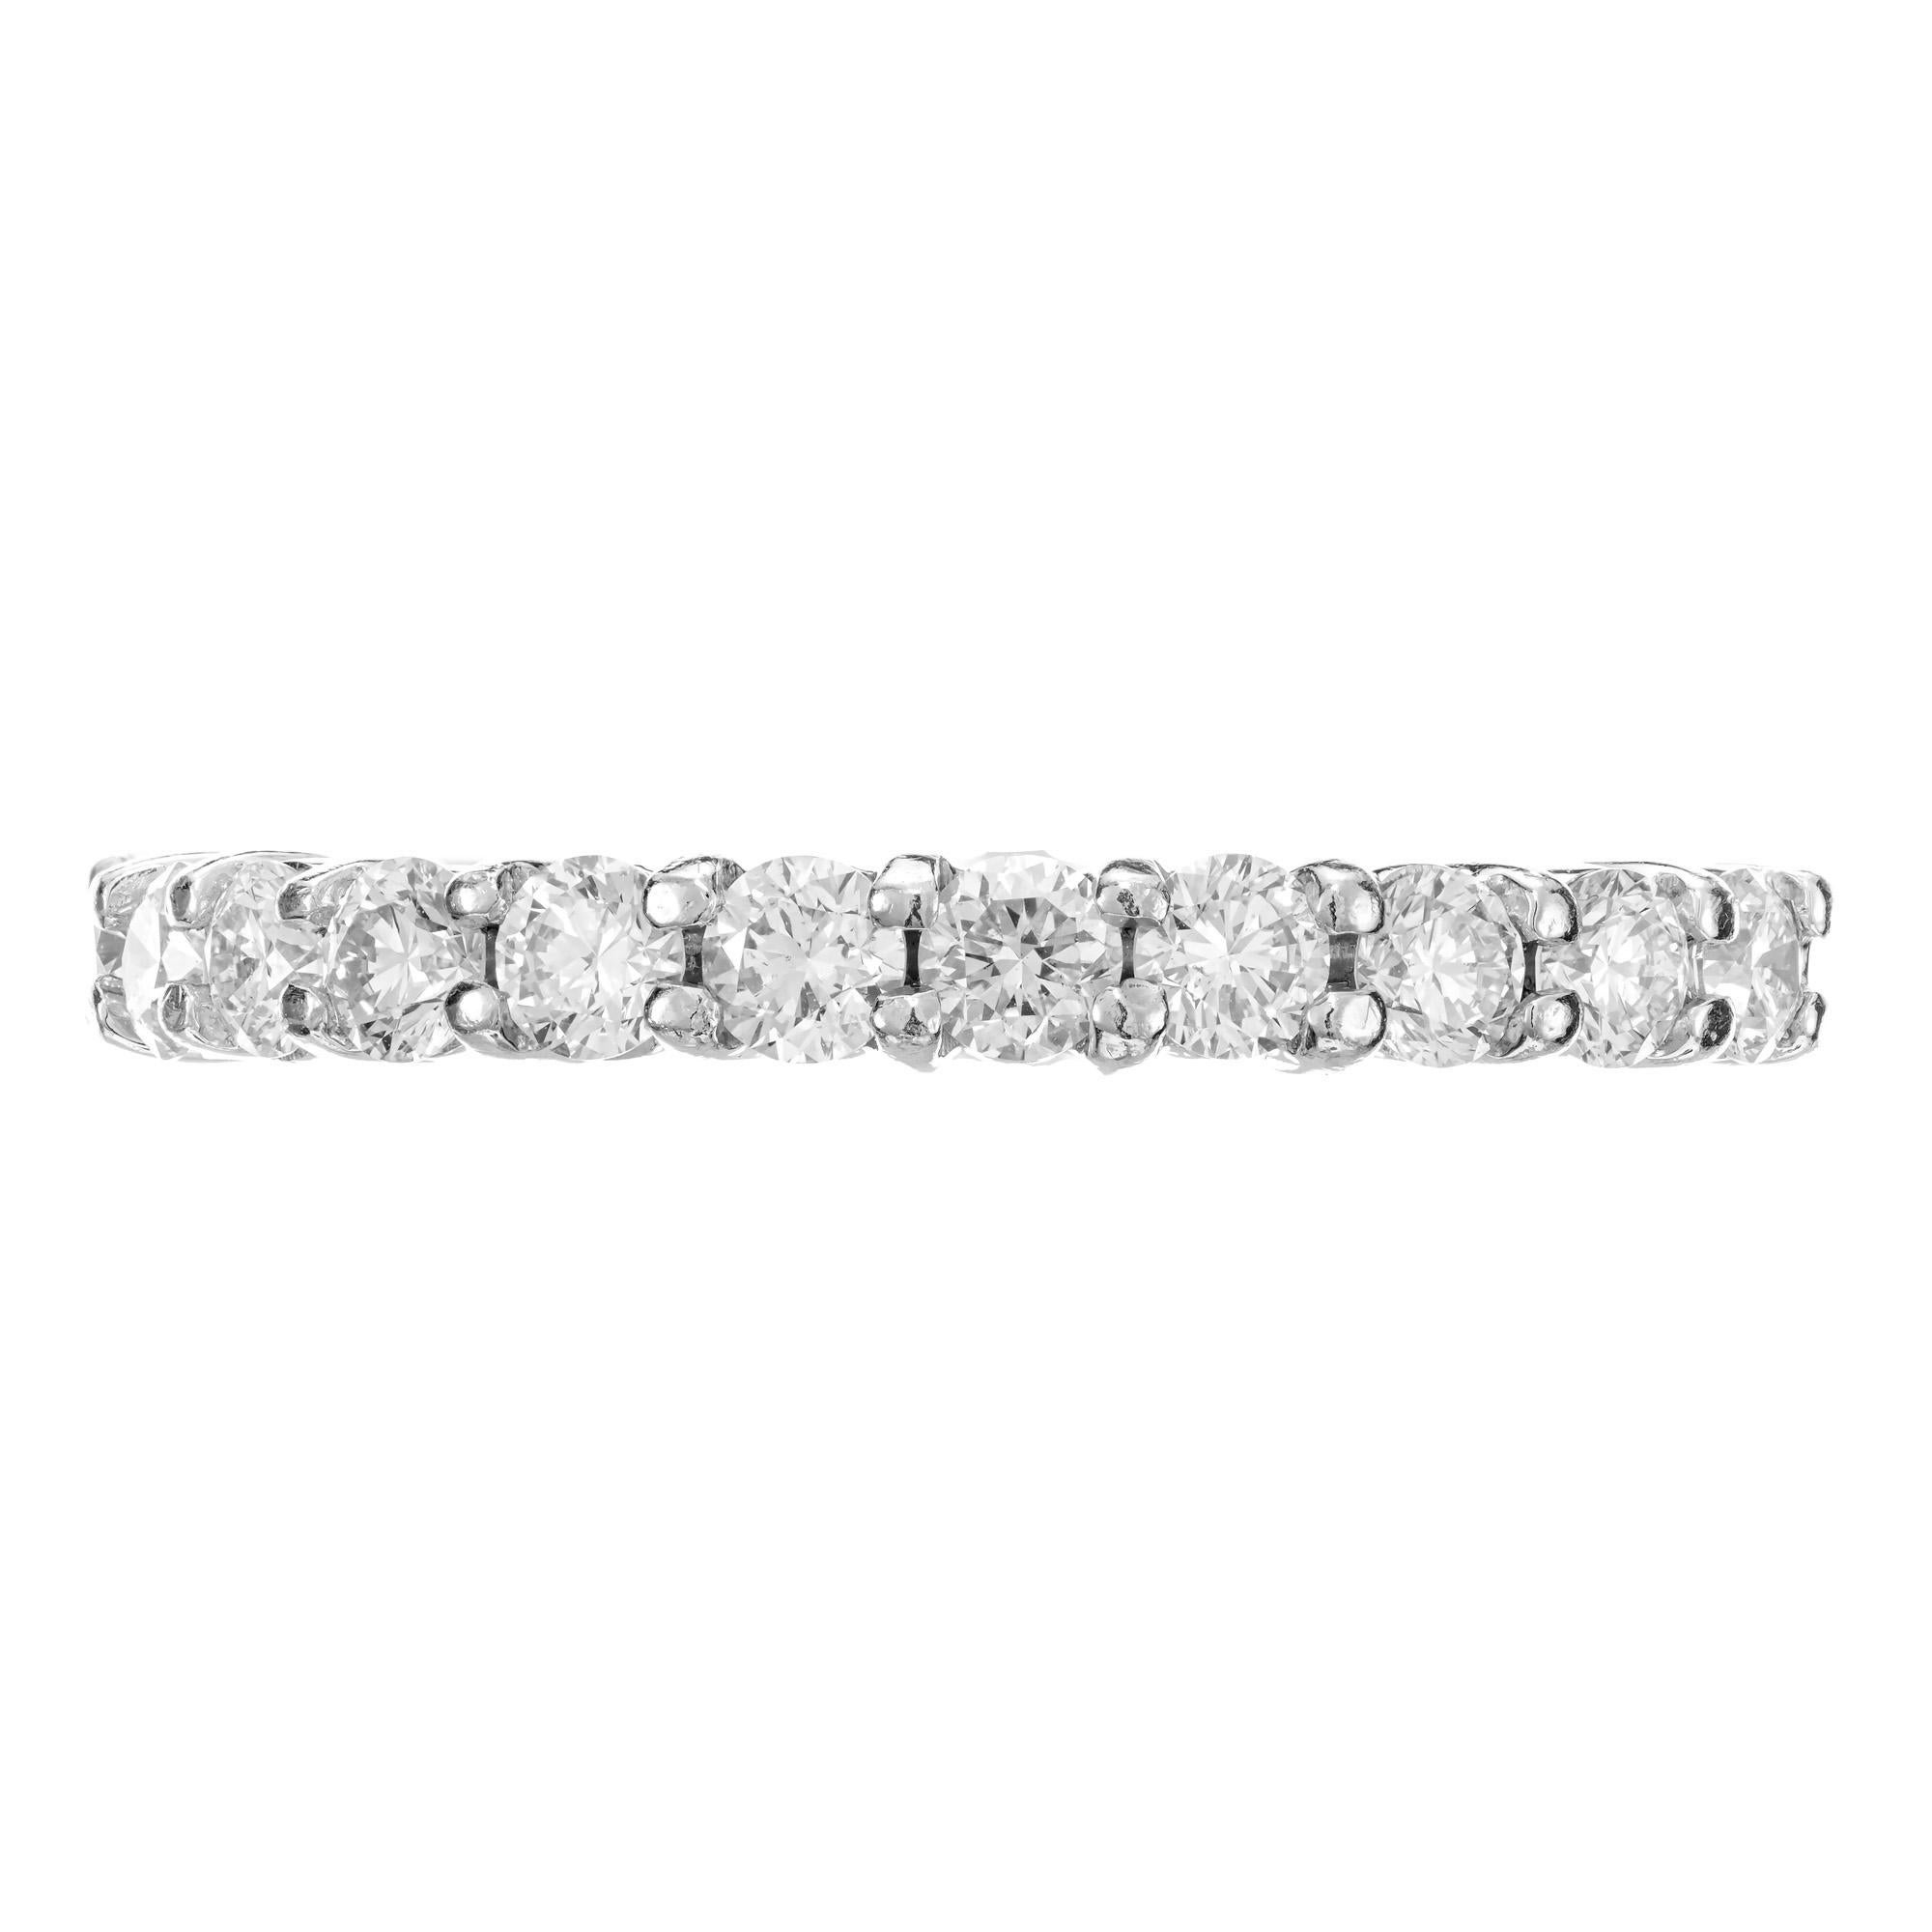 Diamond wedding band ring. Set with 11 round brilliant cut prong set diamonds in a solid platinum setting that was designed and crafted in the Peter Suchy Workshop.

11 round diamonds, G VS approx. .50cts
Size 6 and sizable
Platinum 
Stamped: